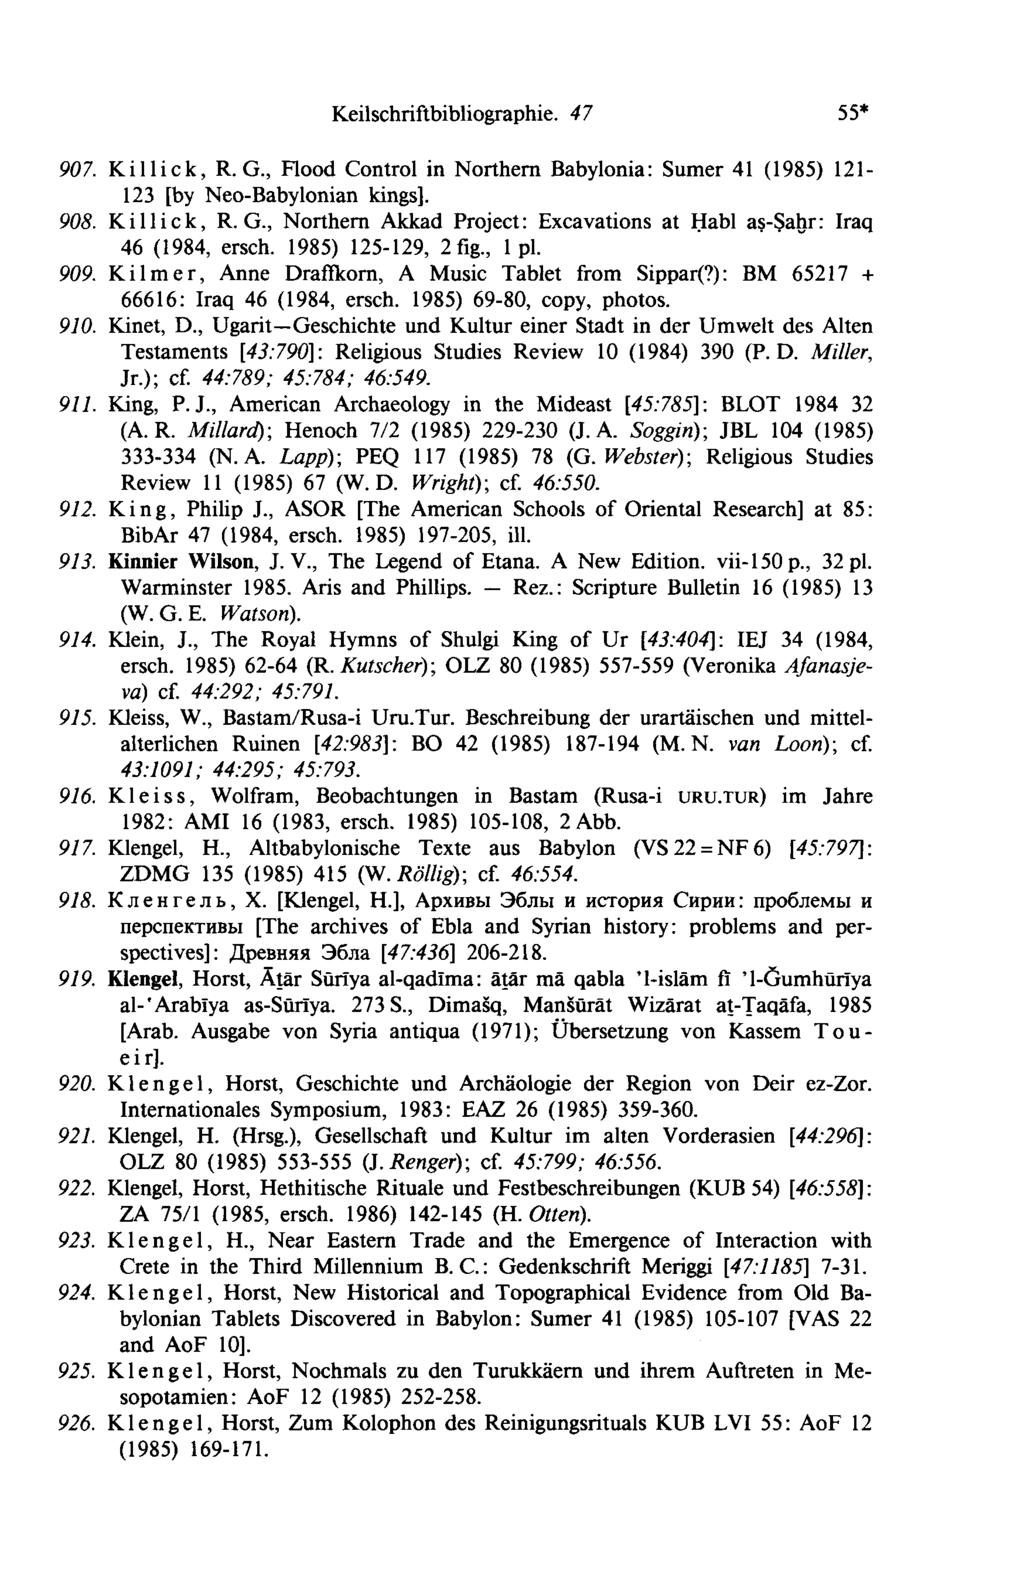 Keilschriftbibliographie. 4 7 55* 121 (1985) 41 907. Killick, R. G., Rood Control in Northern Babylonia: Sumer 123 [by Neo-Baby Ionian kings]. 908. Killick, R. G., Northern Akkad Project: Excavations at Habl aş Şahr: Iraq 46 (1984, ersch.